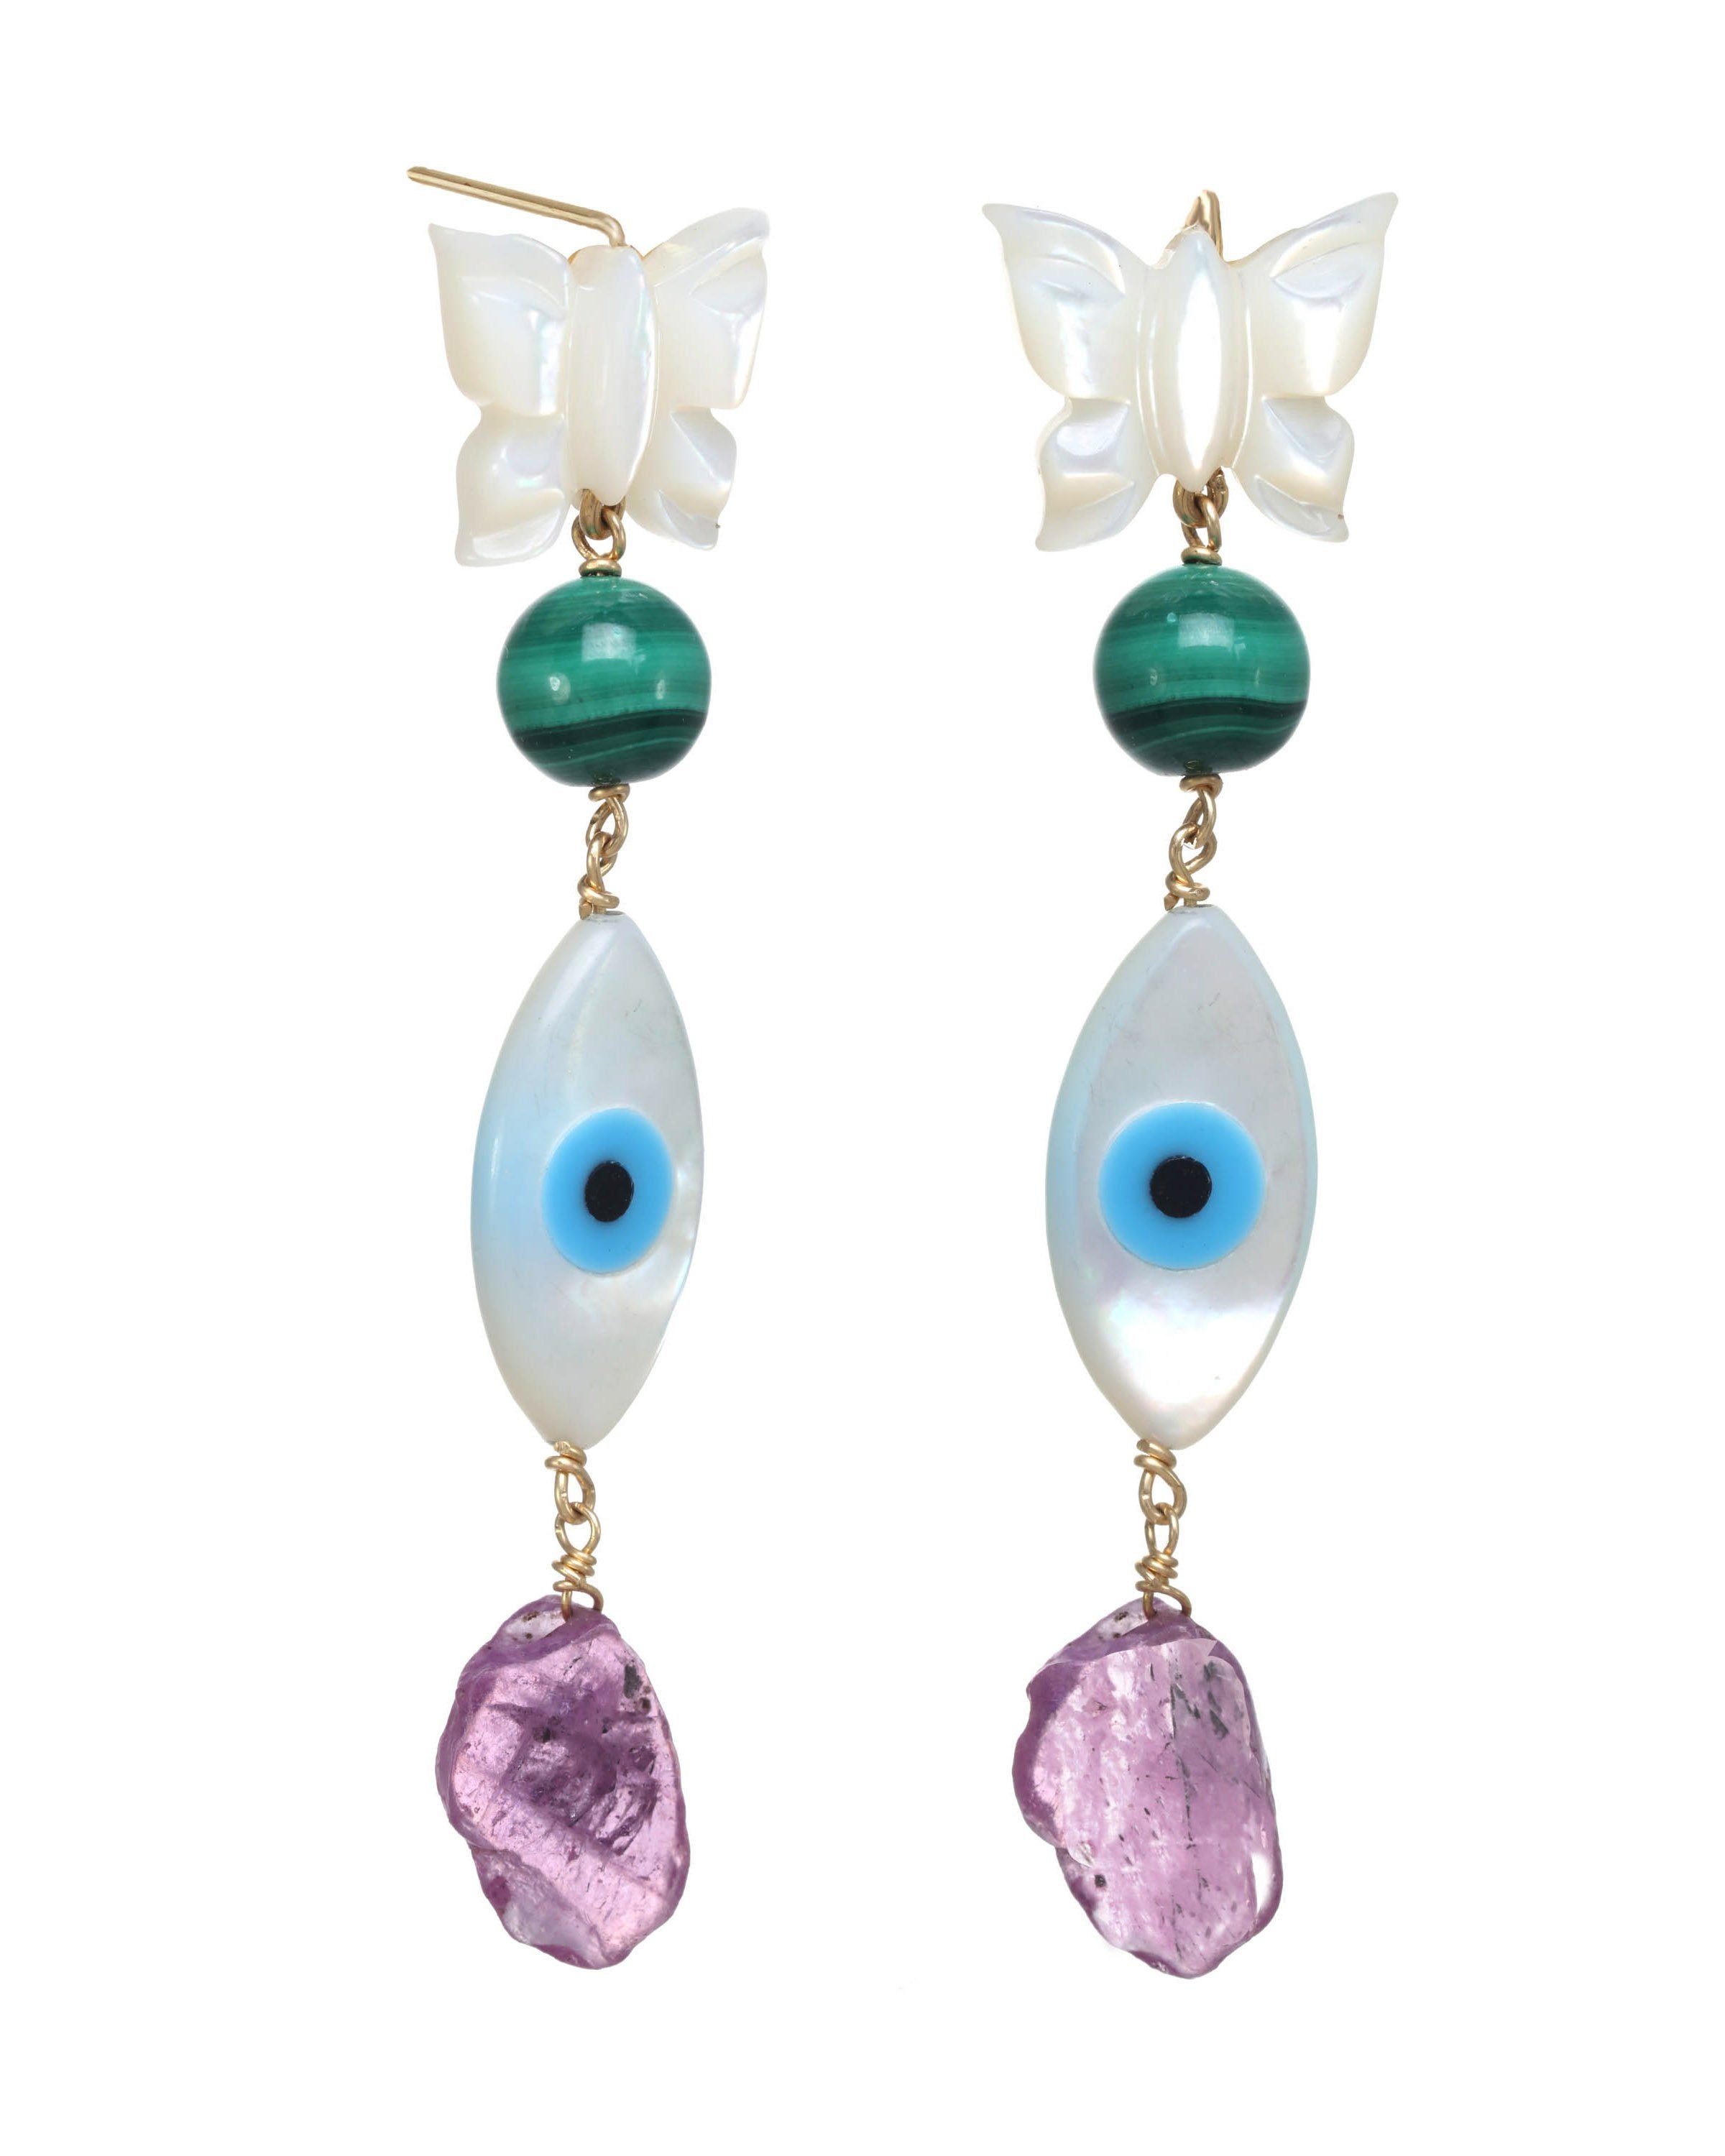 Dulce Earrings by KOZAKH. 3 inch drop dangling earrings, crafted in 14K Gold Filled, featuring a Mother of Pearl Butterfly charm, a round cut Malachite, a hand-carved Mother of Pearl eye charm, and a Pink Tourmaline shard.